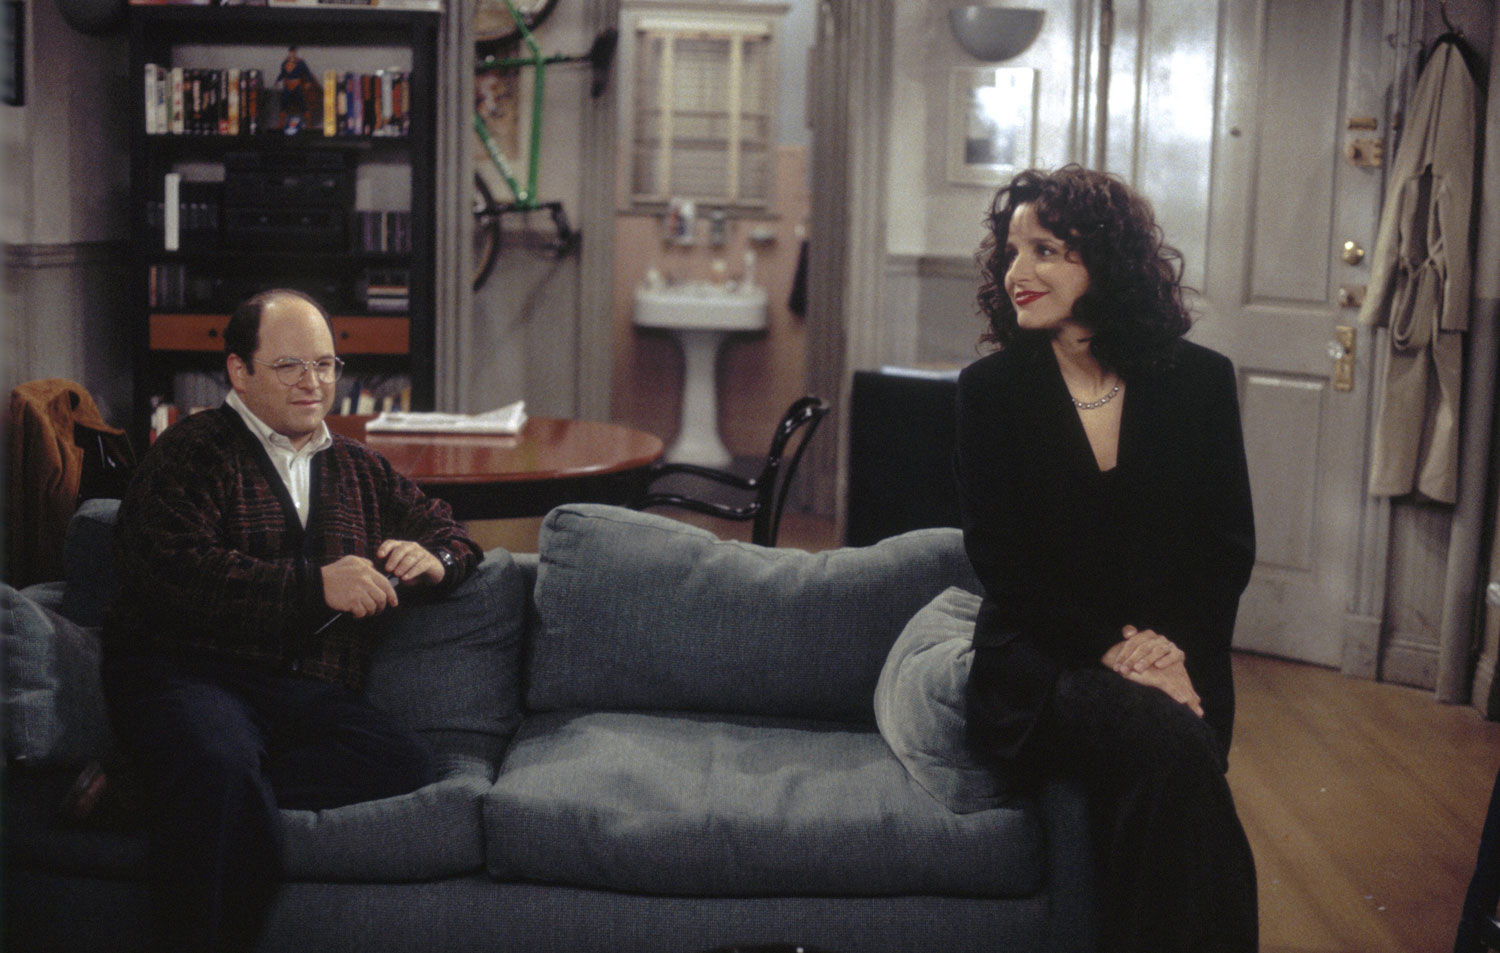 From left: Jason Alexander as George Costanza and Julia Louis-Dreyfus as Elaine Benes in Episode 16 "The Burning" from the television show Seinfeld.